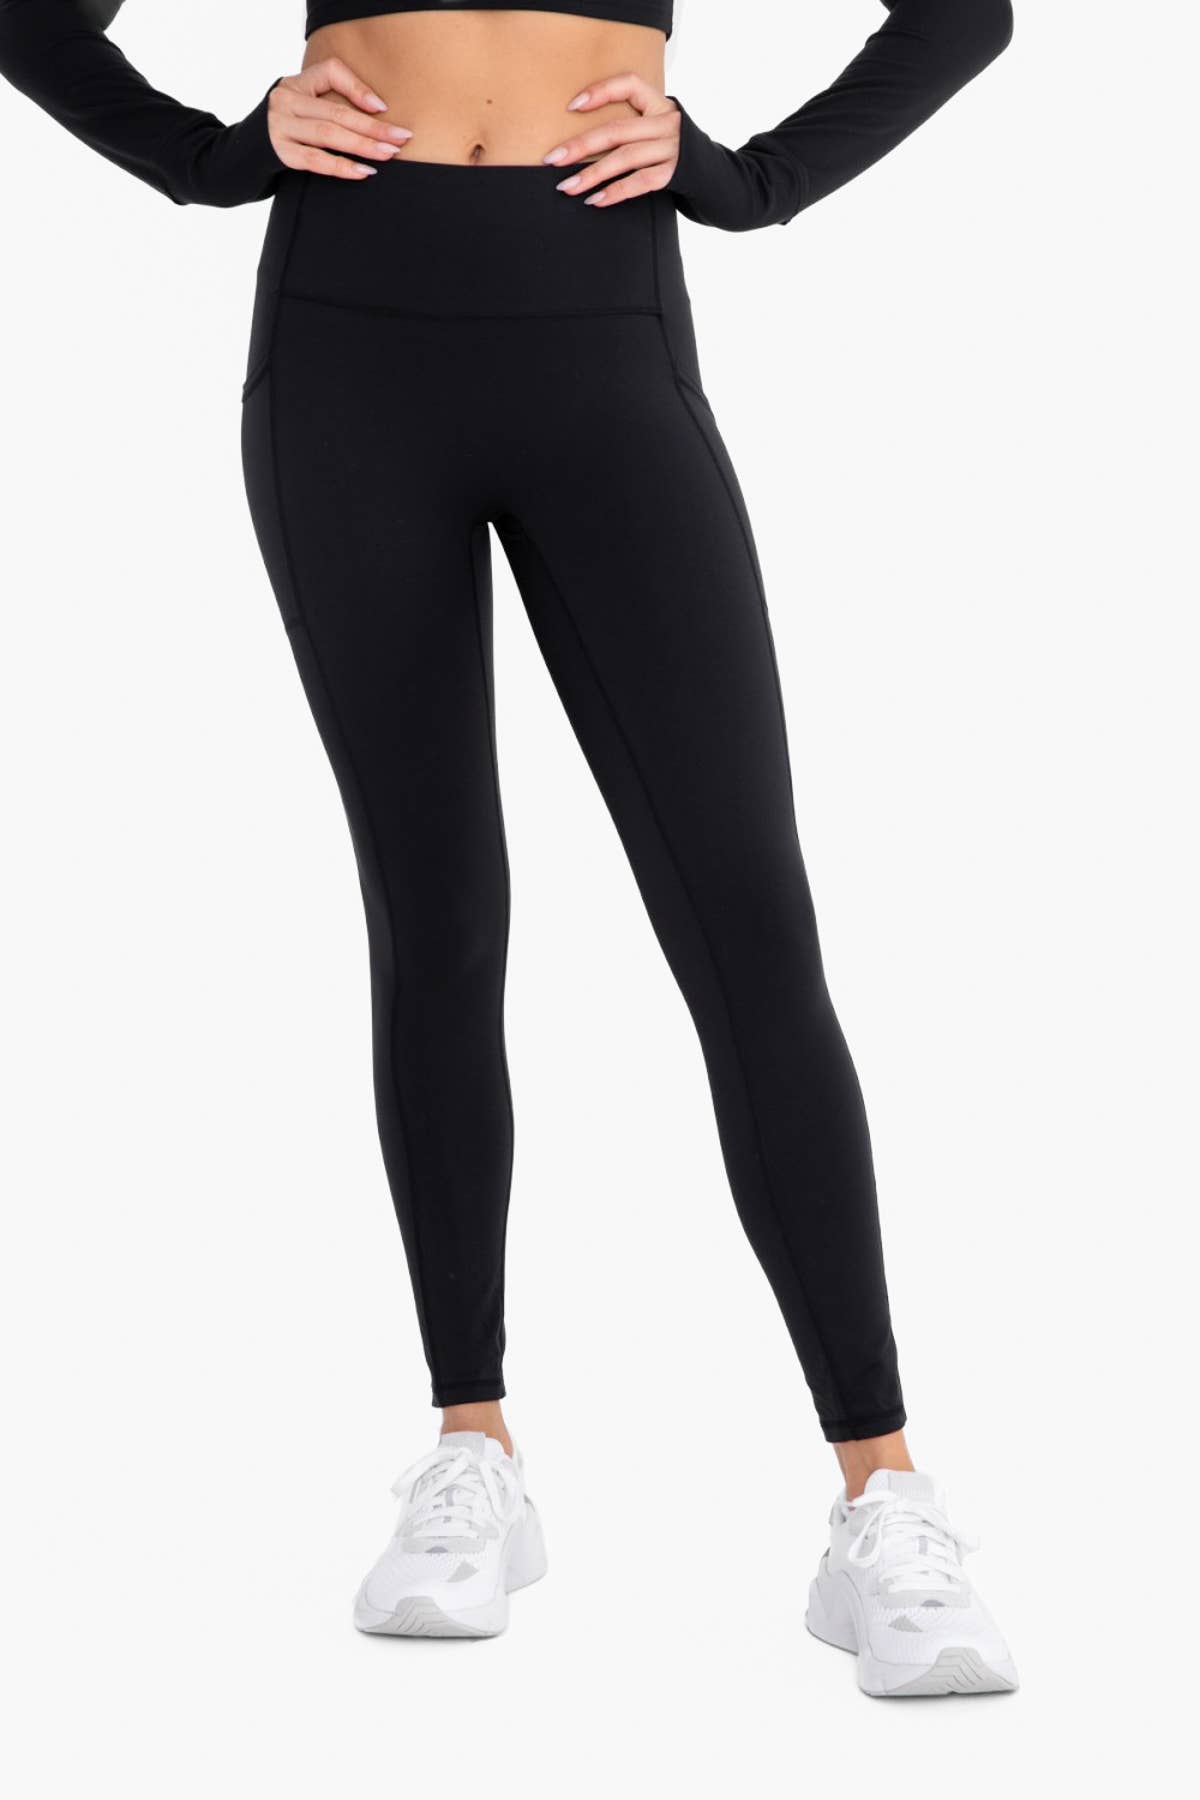 Black Athletic Leggings with Pockets